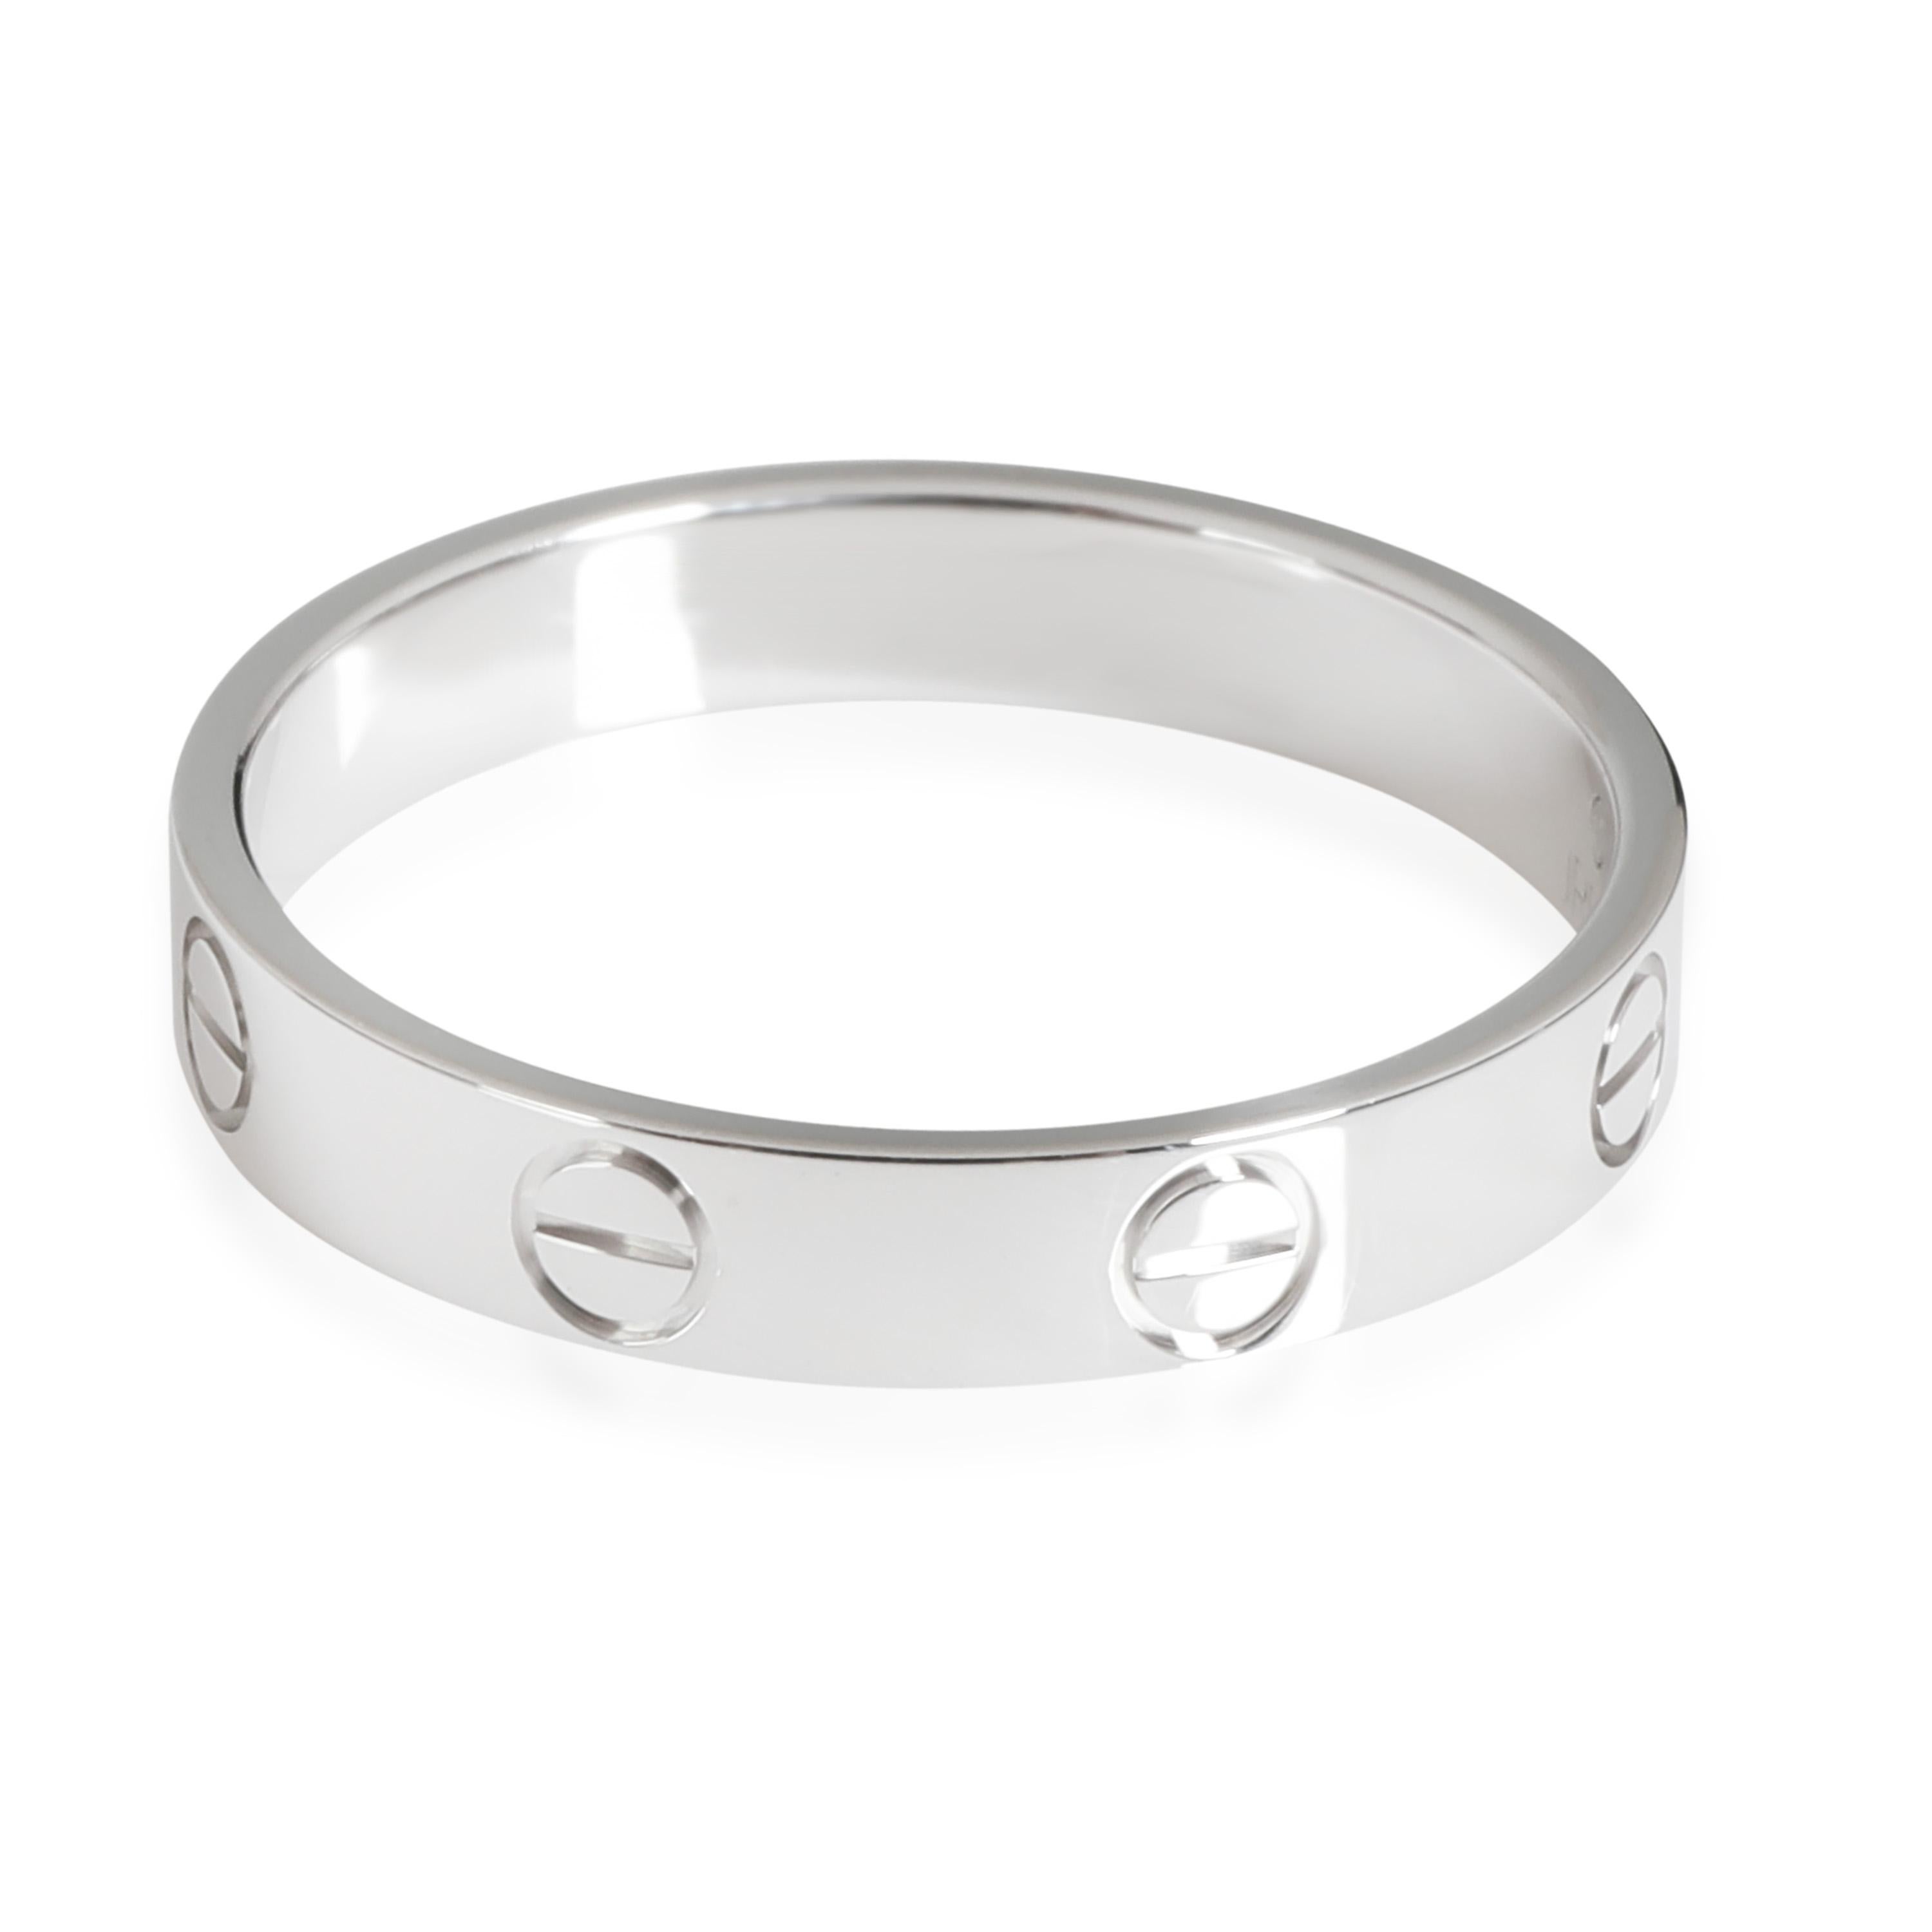 Cartier LOVE Wedding Band in 18k White Gold

PRIMARY DETAILS
SKU: 117053
Listing Title: Cartier LOVE Wedding Band in 18k White Gold
Condition Description: Retails for 1250 USD. In excellent condition and recently polished. Ring size is 8.0.Comes